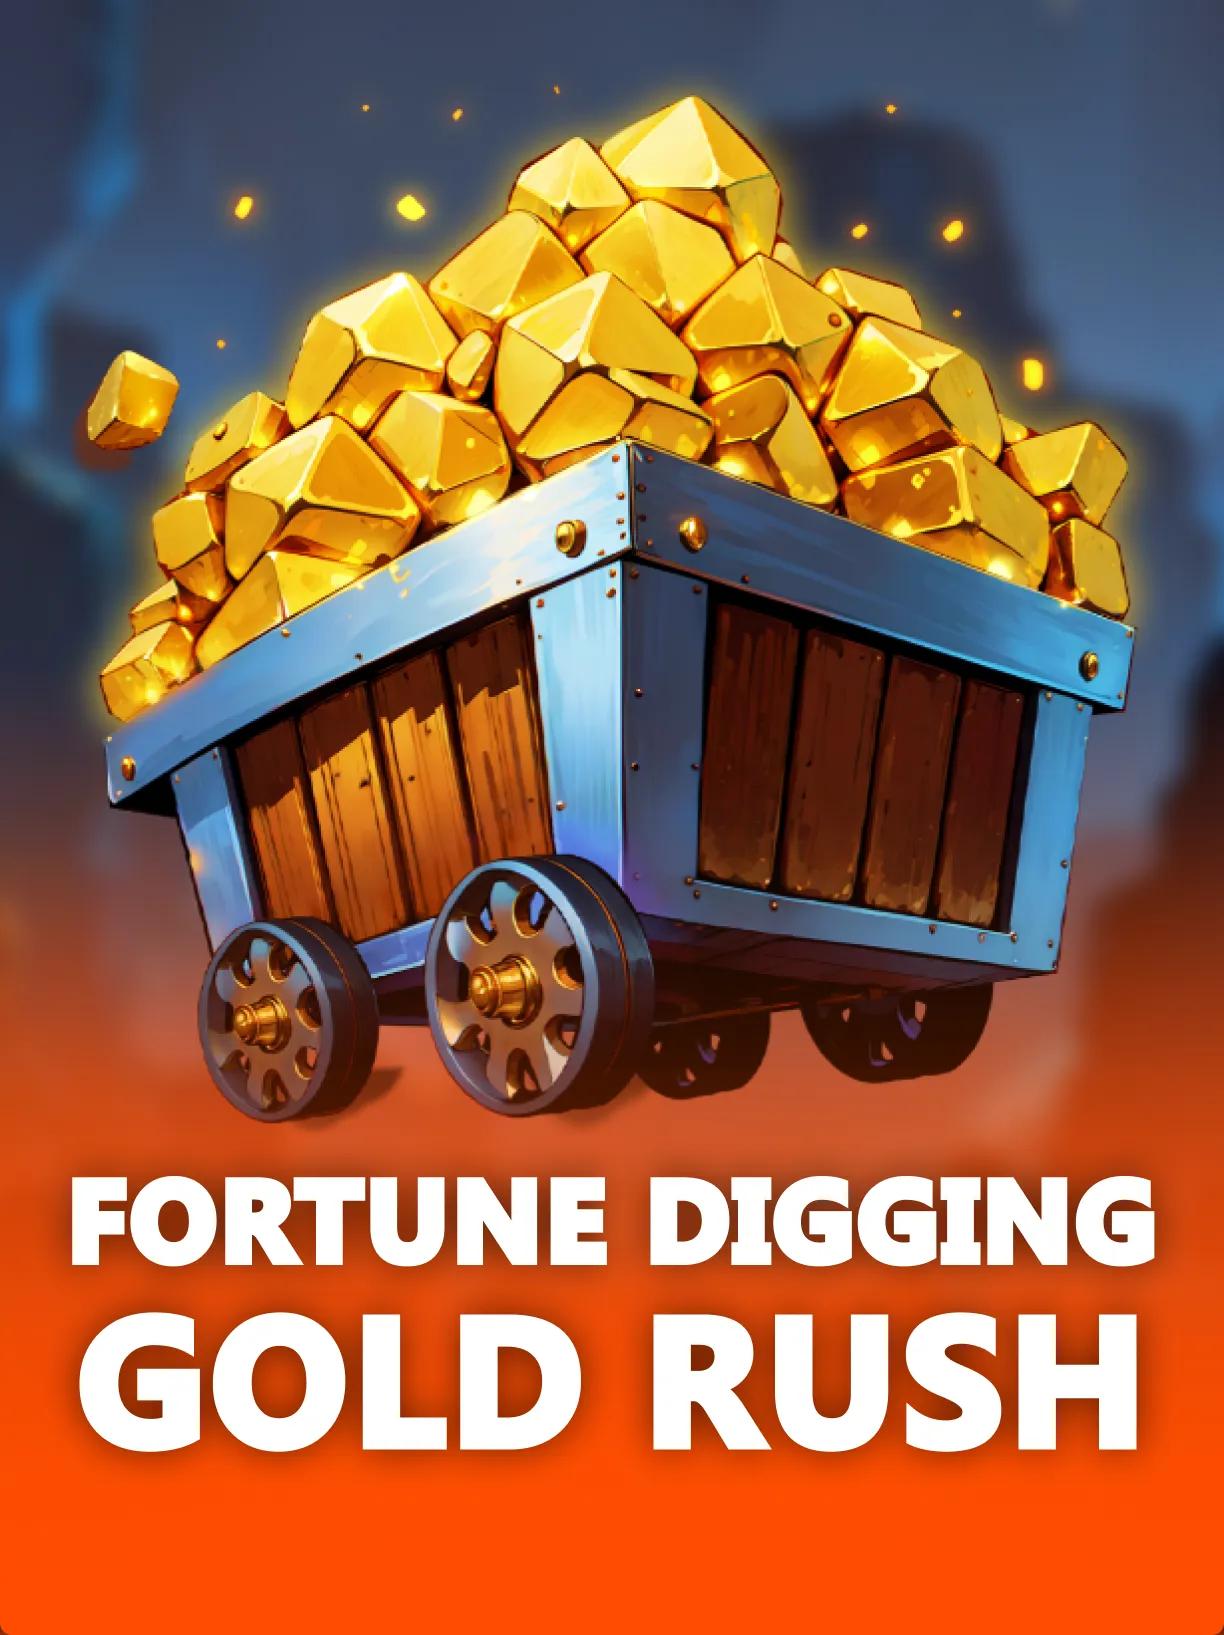 dl-fortune-digging-gold-Rush-square.webp